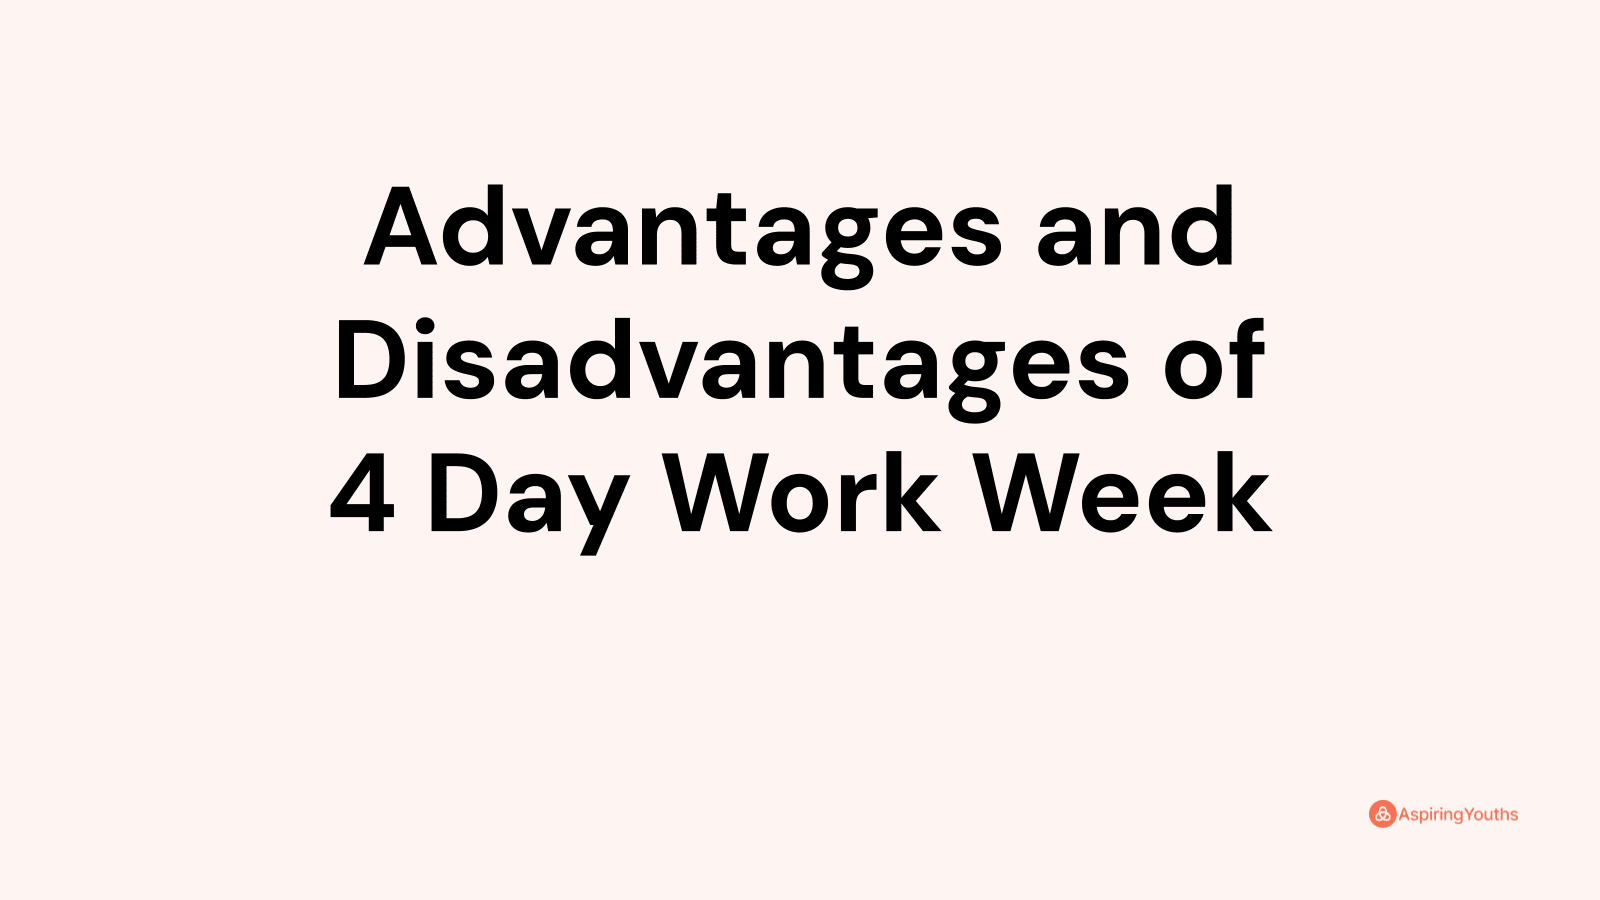 Advantages and disadvantages of 4 Day Work Week